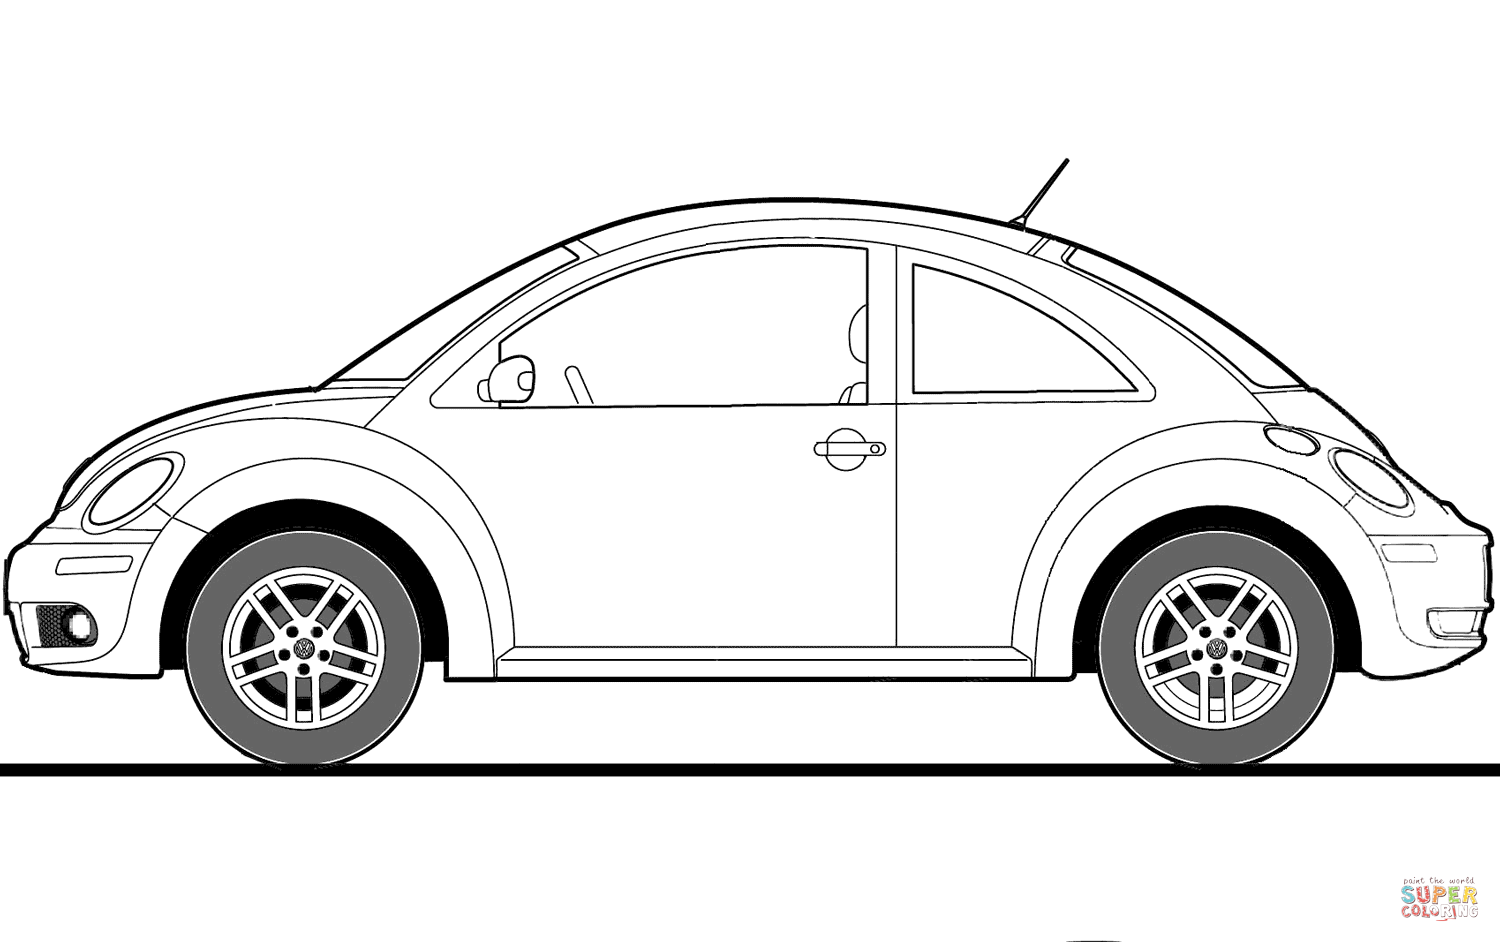 Volkswagen beetle coloring page free printable coloring pages